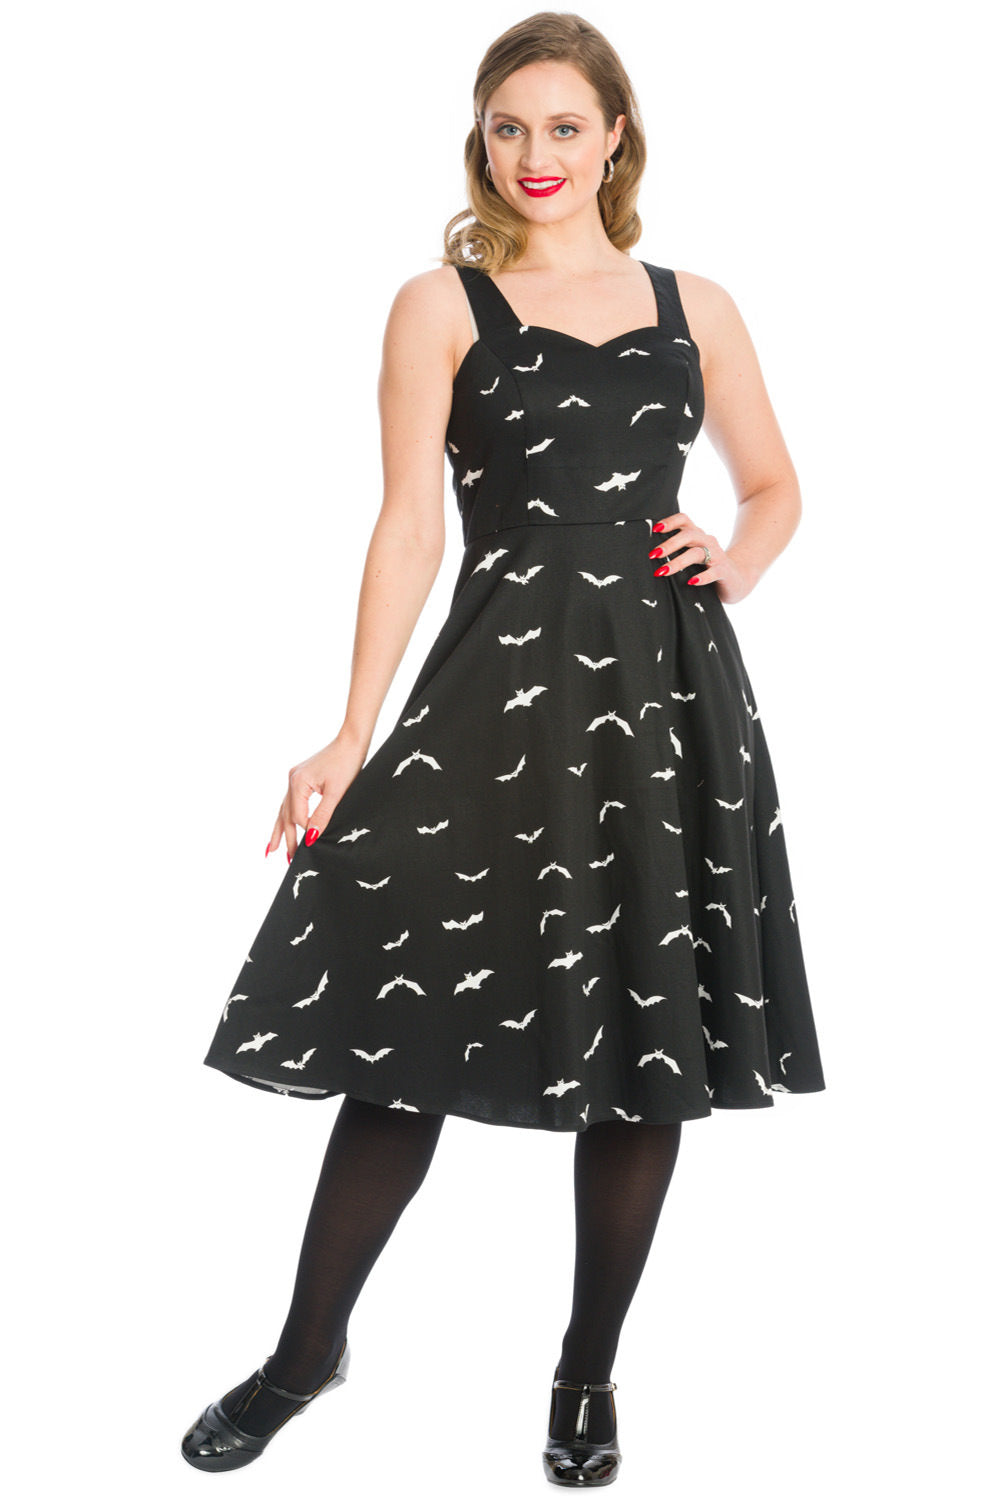 Blonde woman with a joyful smile standing confidently in a stylish black swing dress featuring a whimsical white bat print.